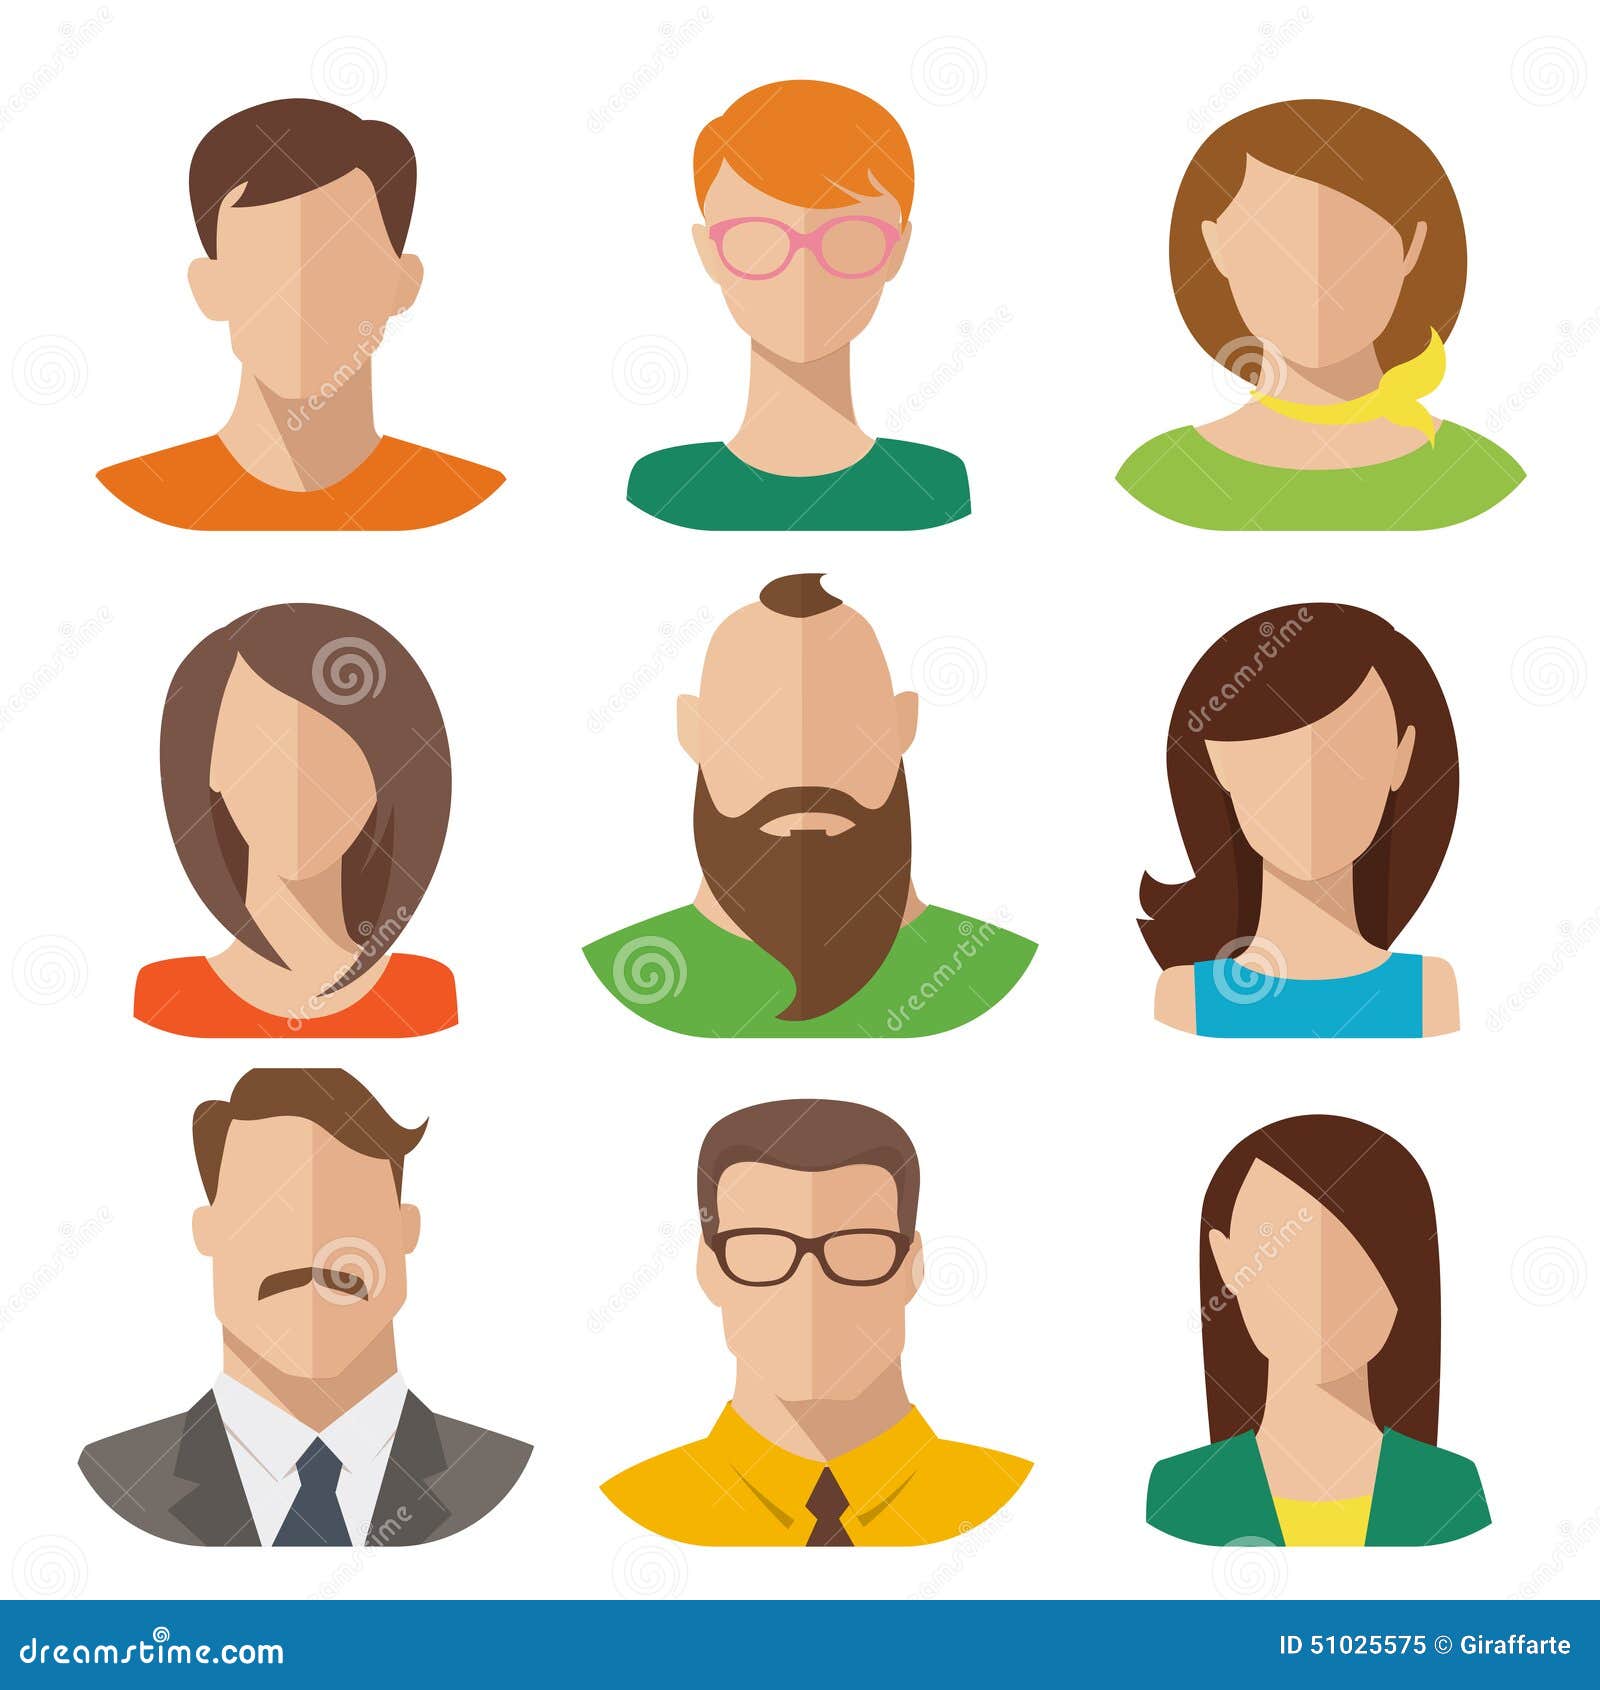 Flat Vector Male And Female Avatars Stock Vector - Image 